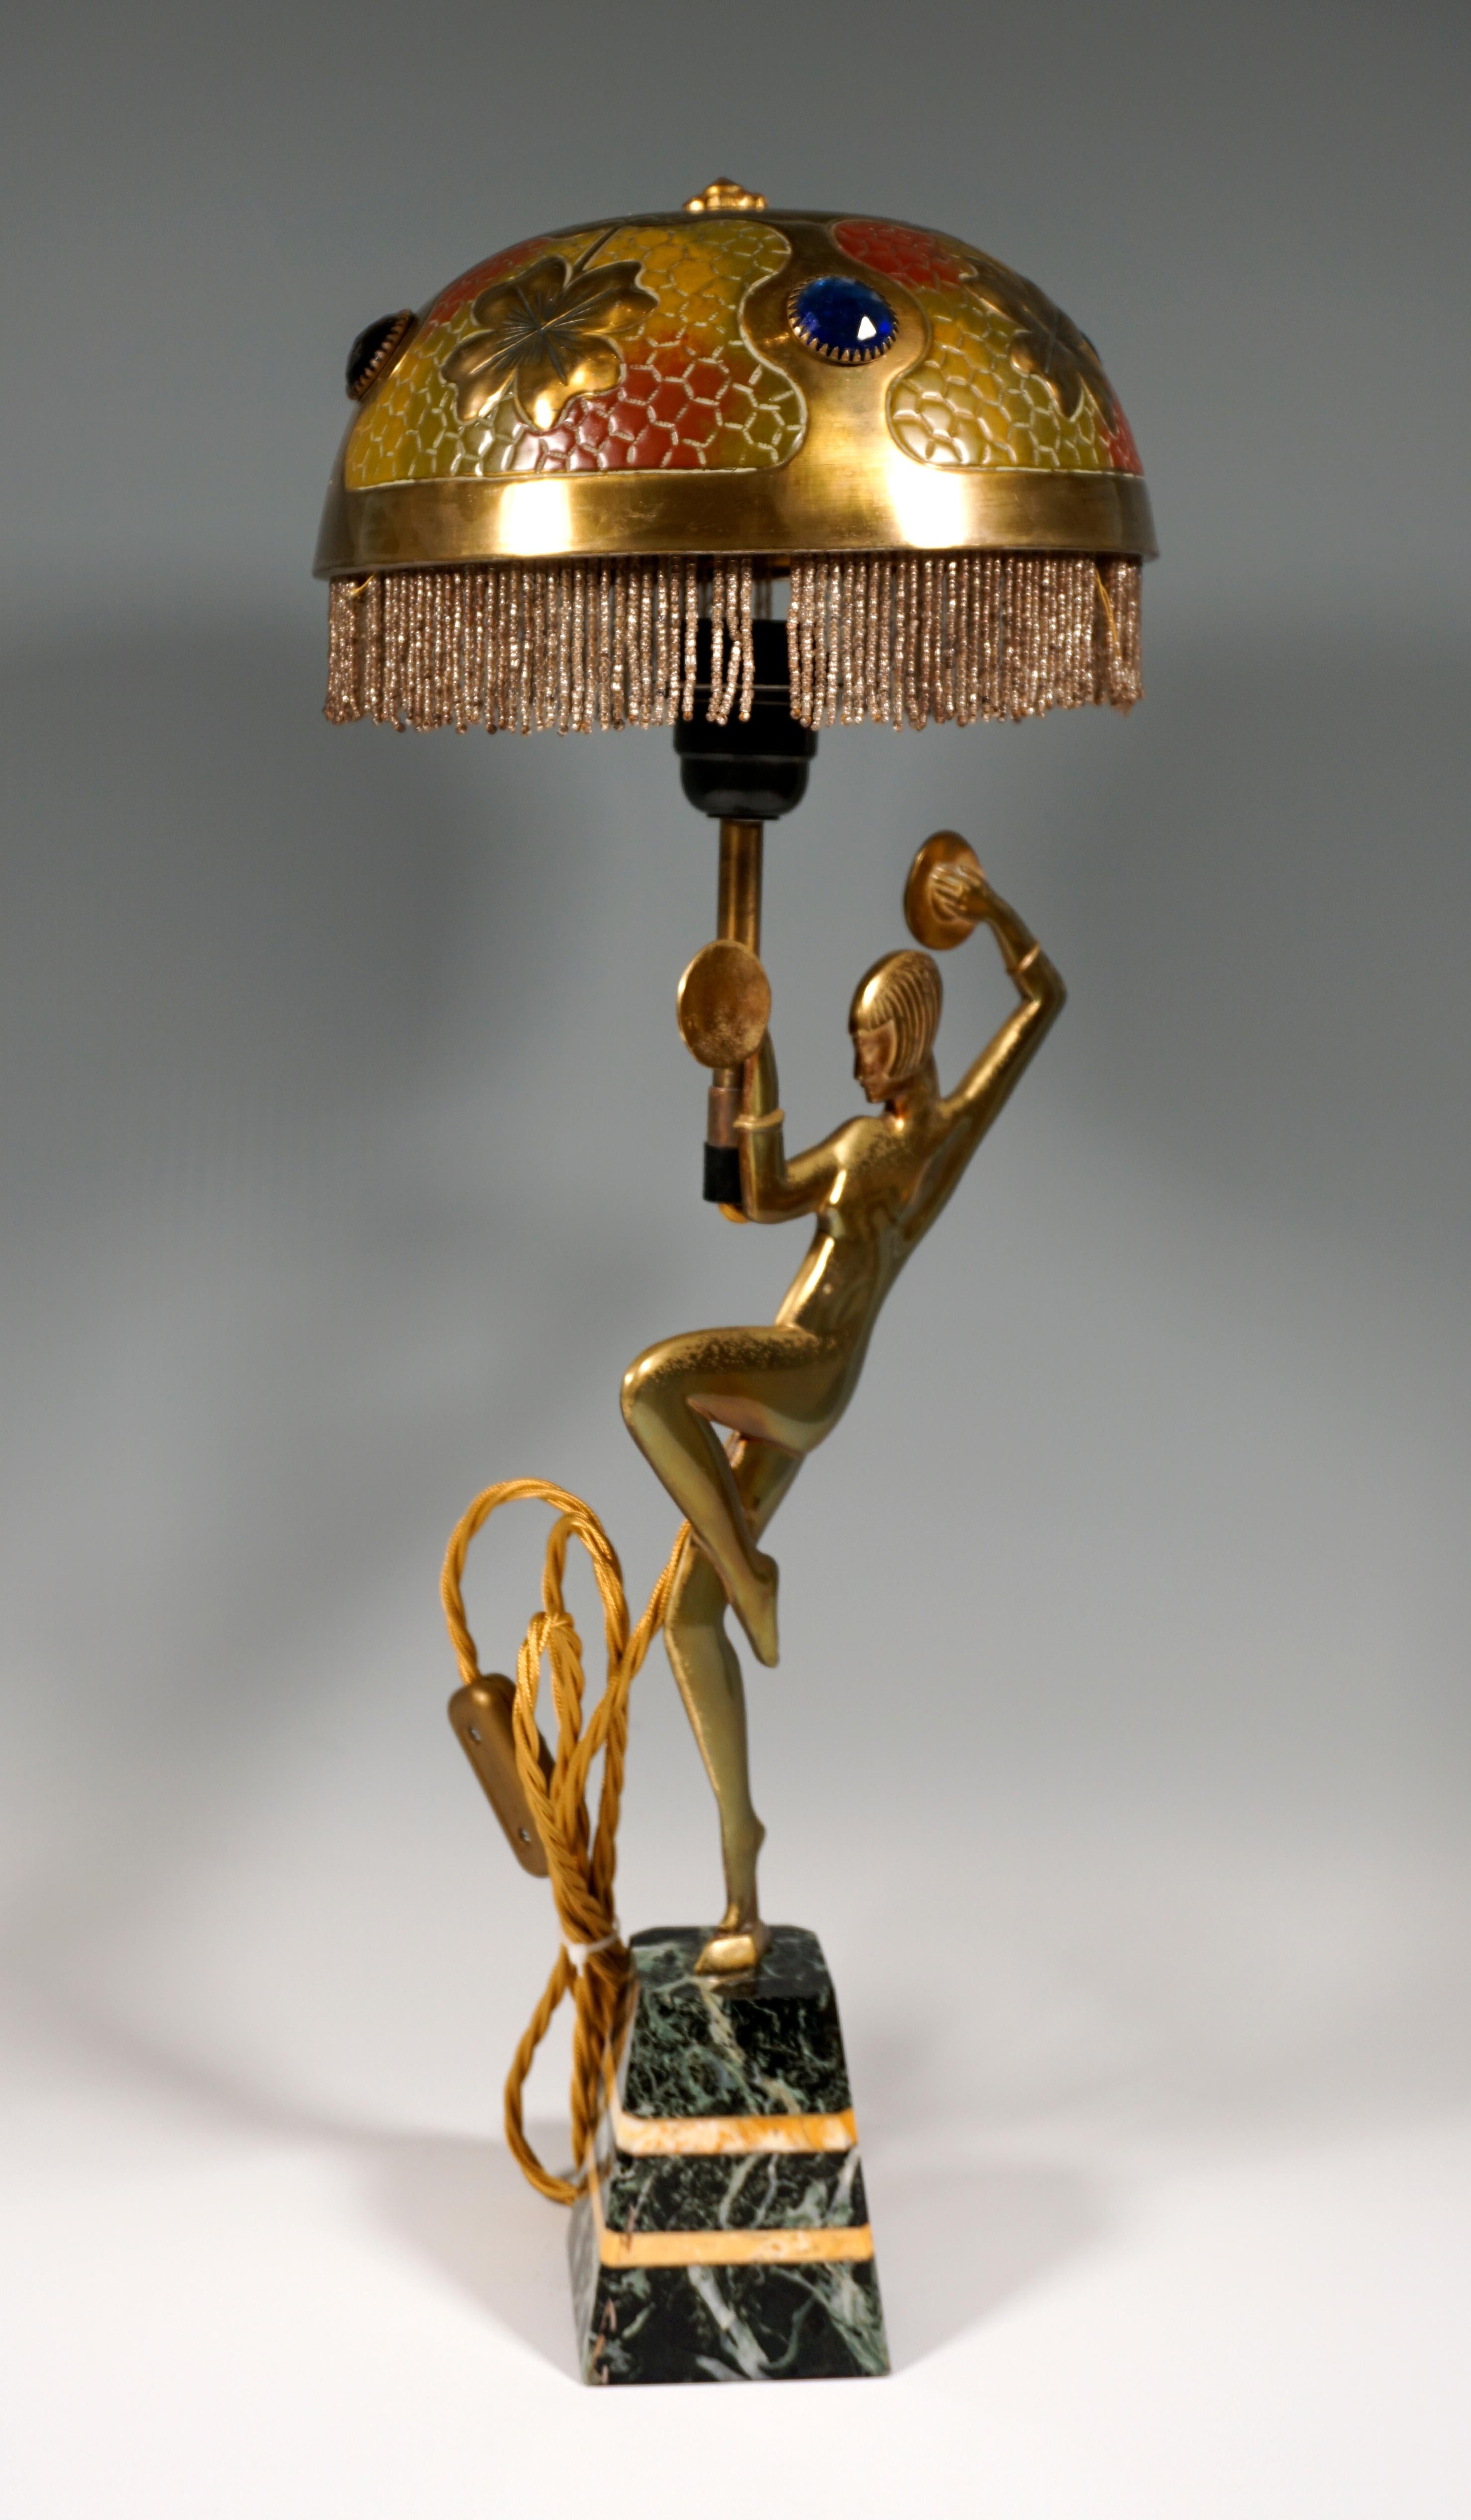 Table lamp with a flat, relief-like, unclothed dancer standing on one leg with cymbals on a black and yellow marble base in the shape of a truncated pyramid. The dome-shaped lampshade with pearl fringes gives a floating impression due to the